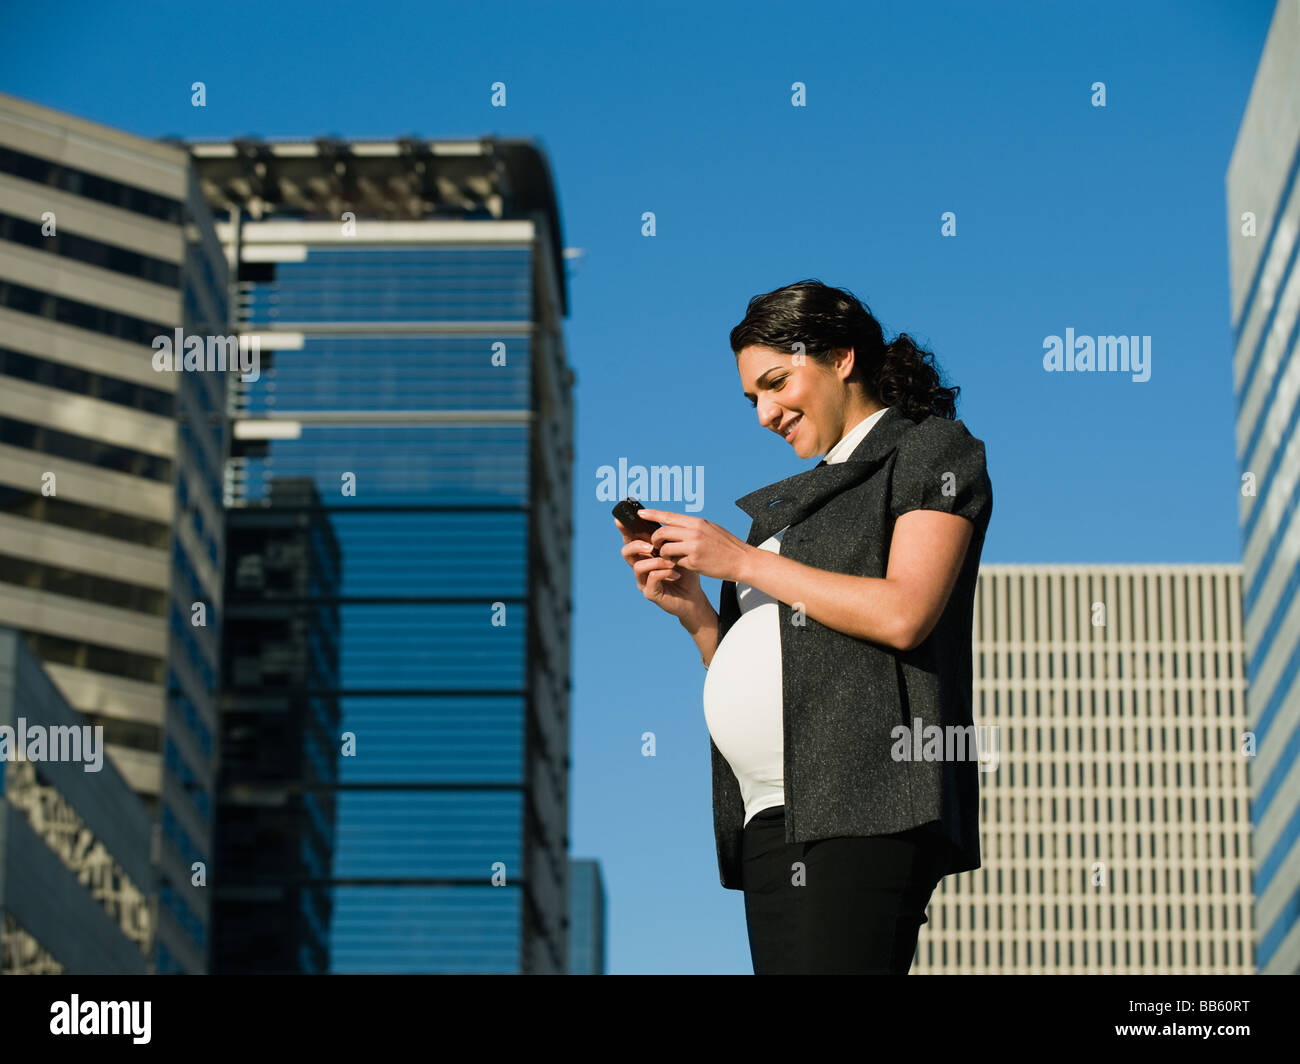 Pregnant Middle Eastern woman using cell phone Banque D'Images